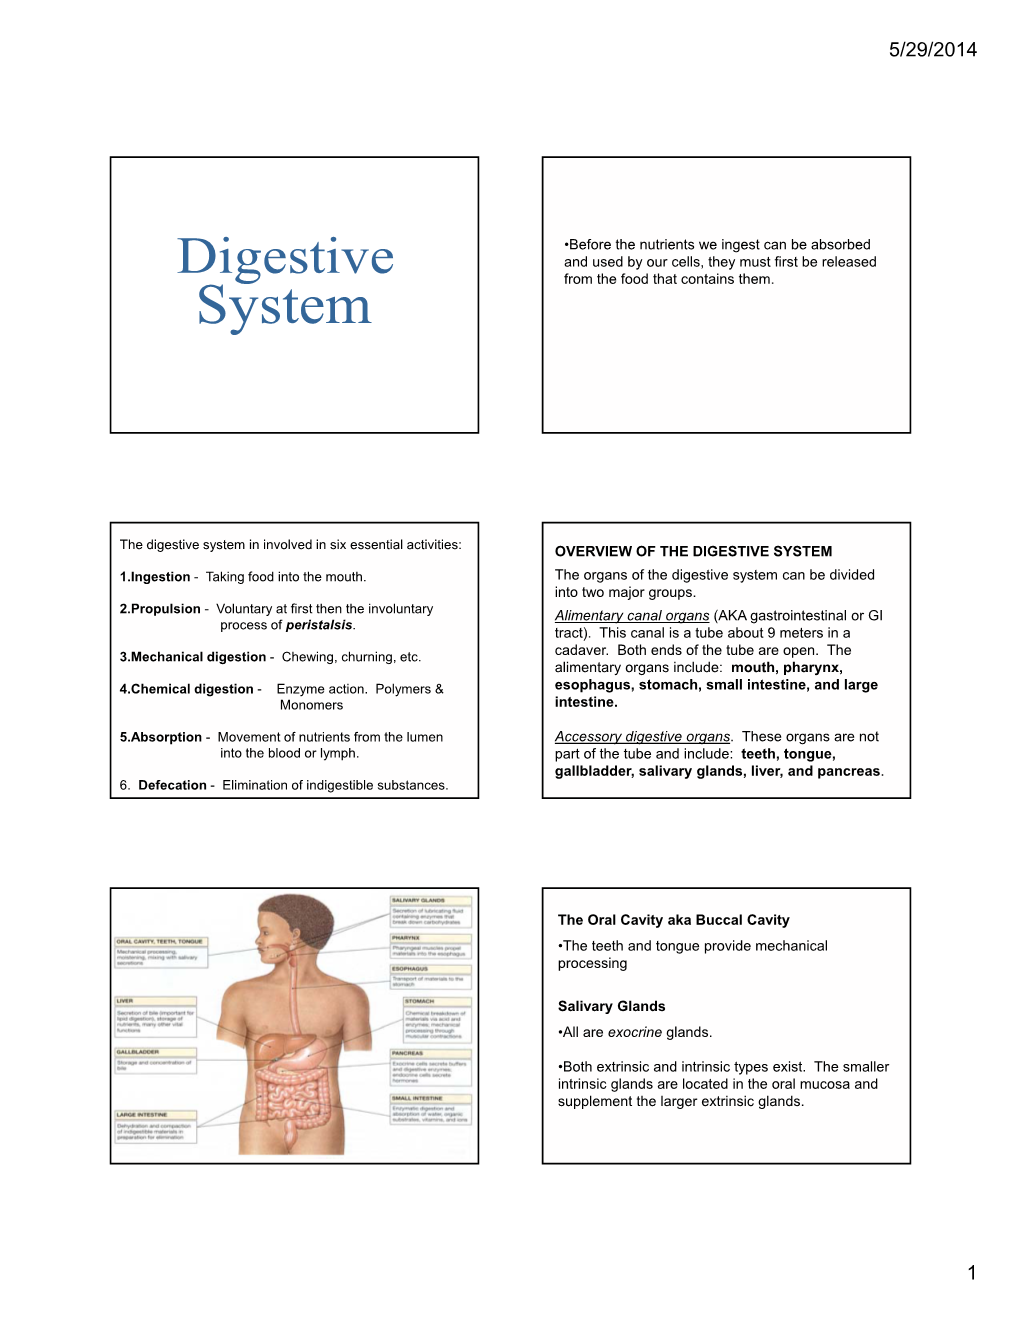 Digestive System in Involved in Six Essential Activities: OVERVIEW of the DIGESTIVE SYSTEM 1.Ingestion - Taking Food Into the Mouth